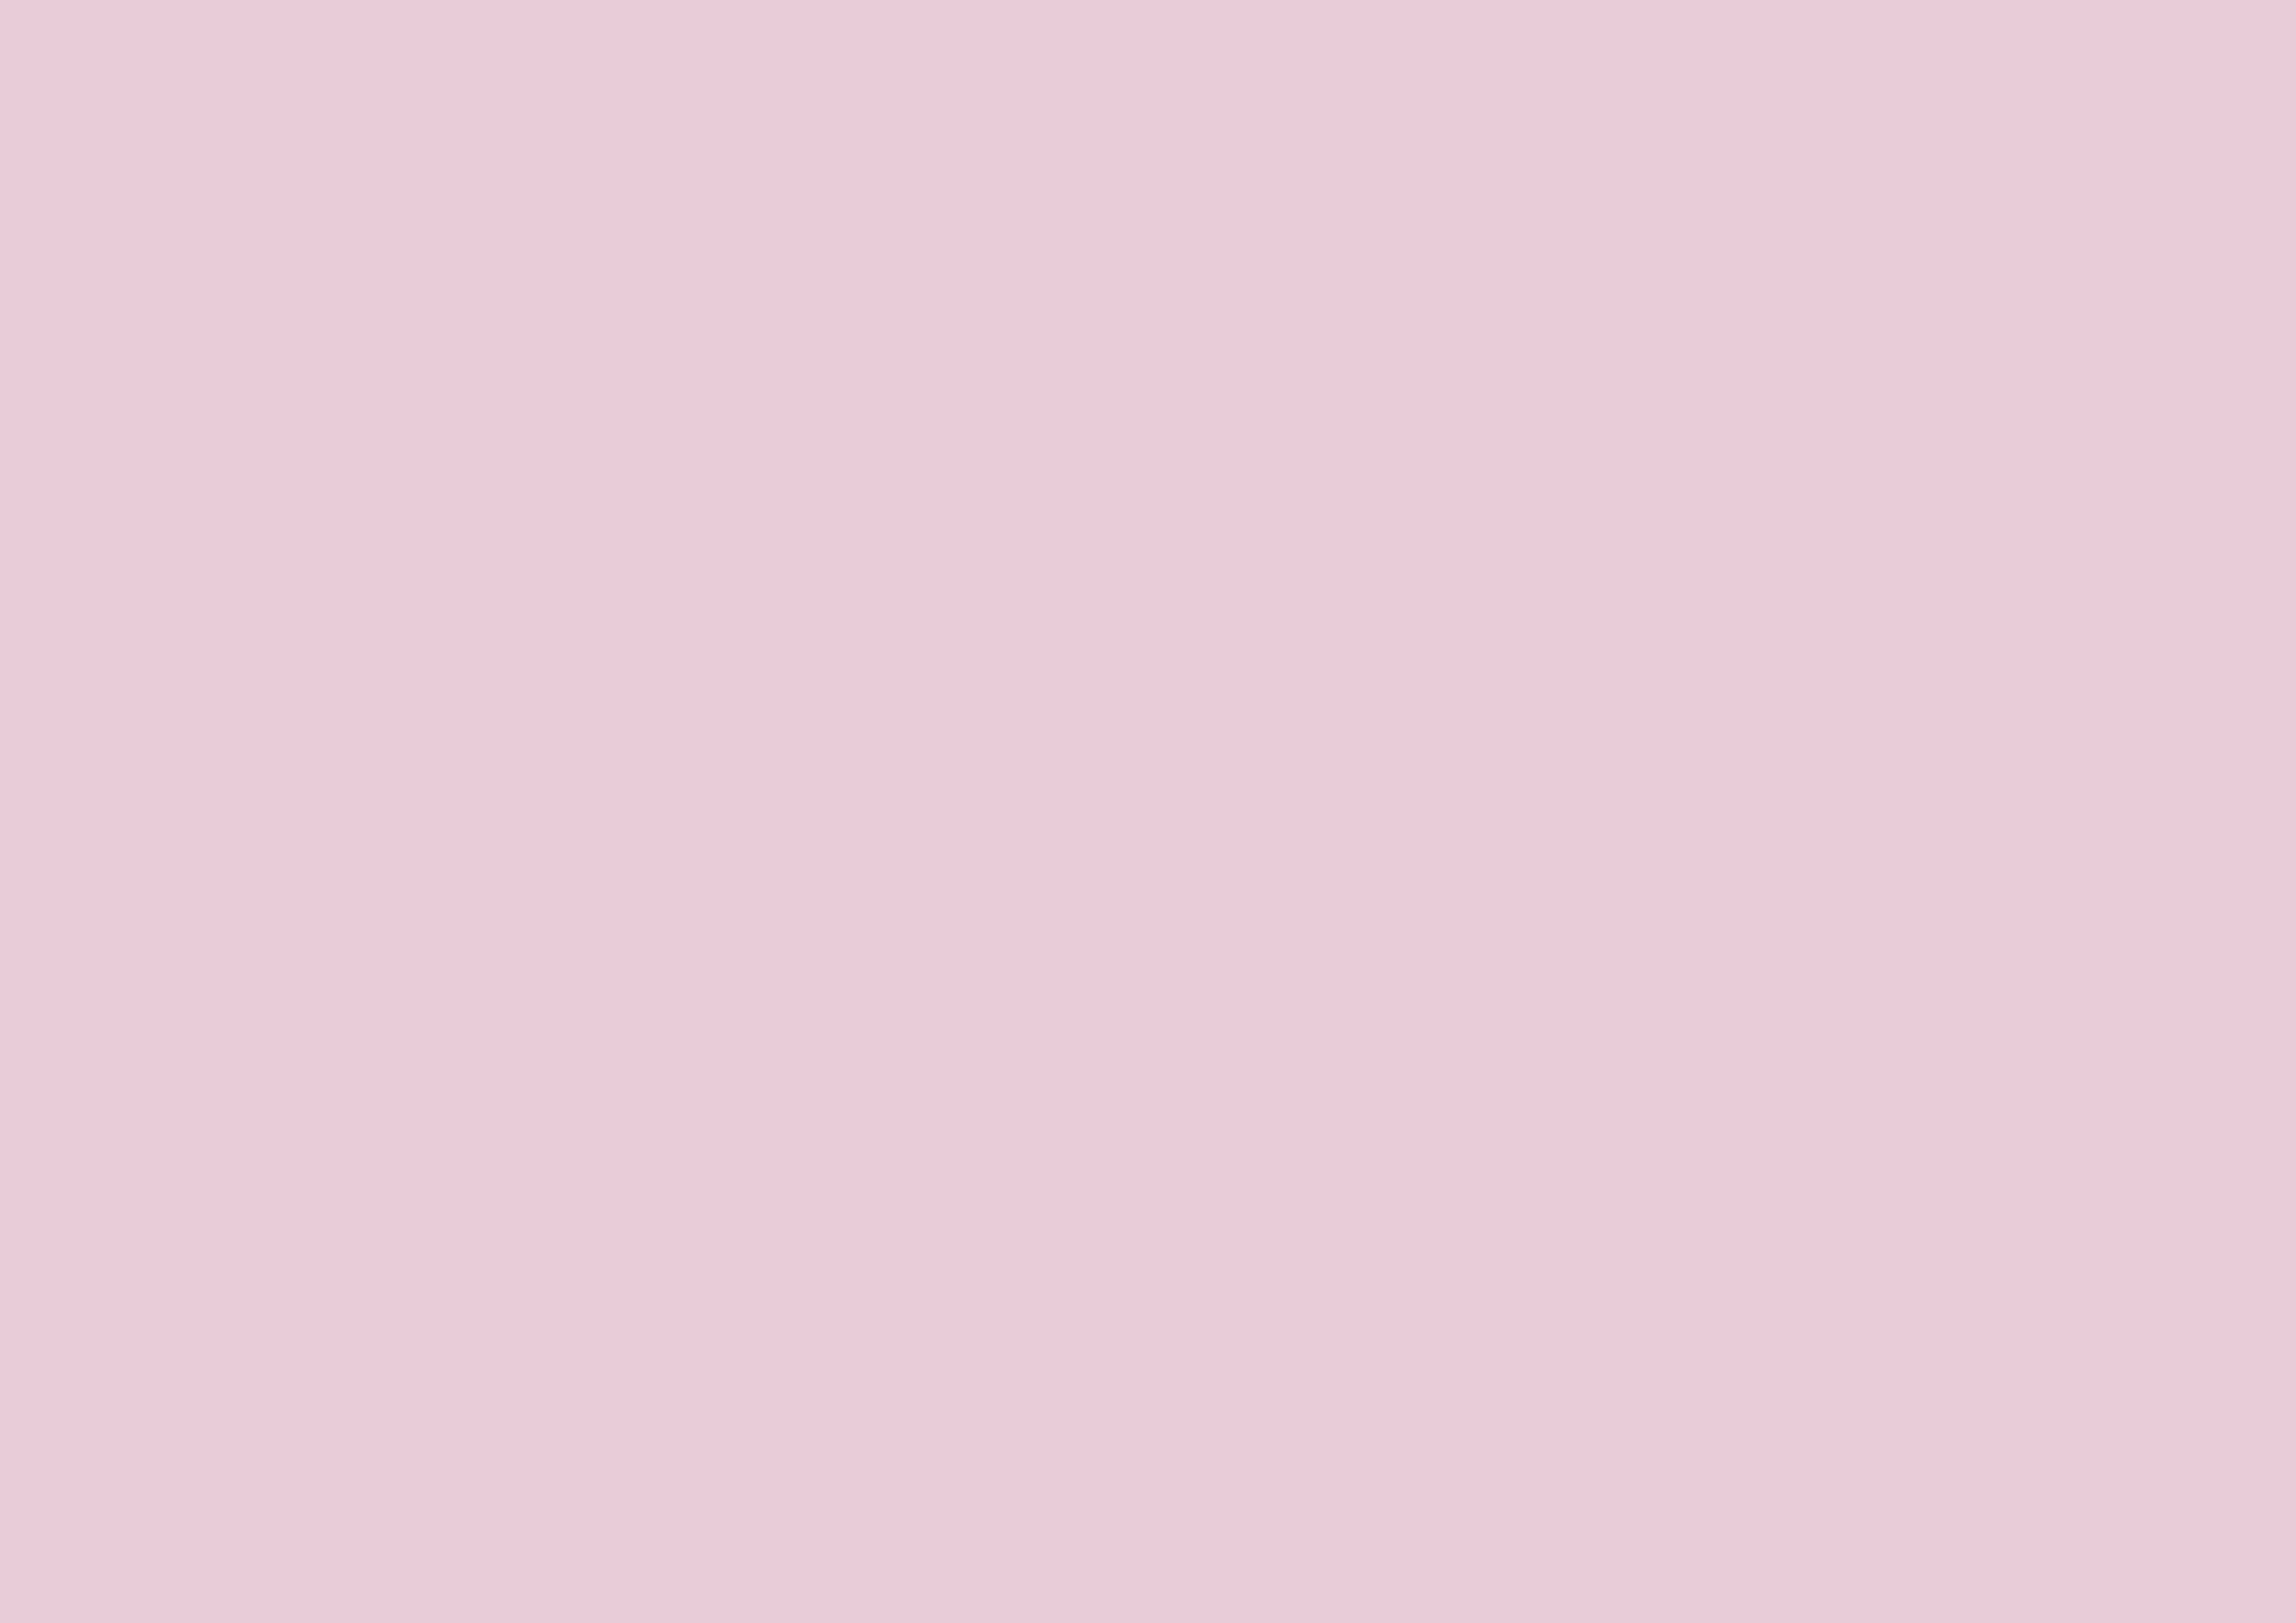 3508x2480 Queen Pink Solid Color Background